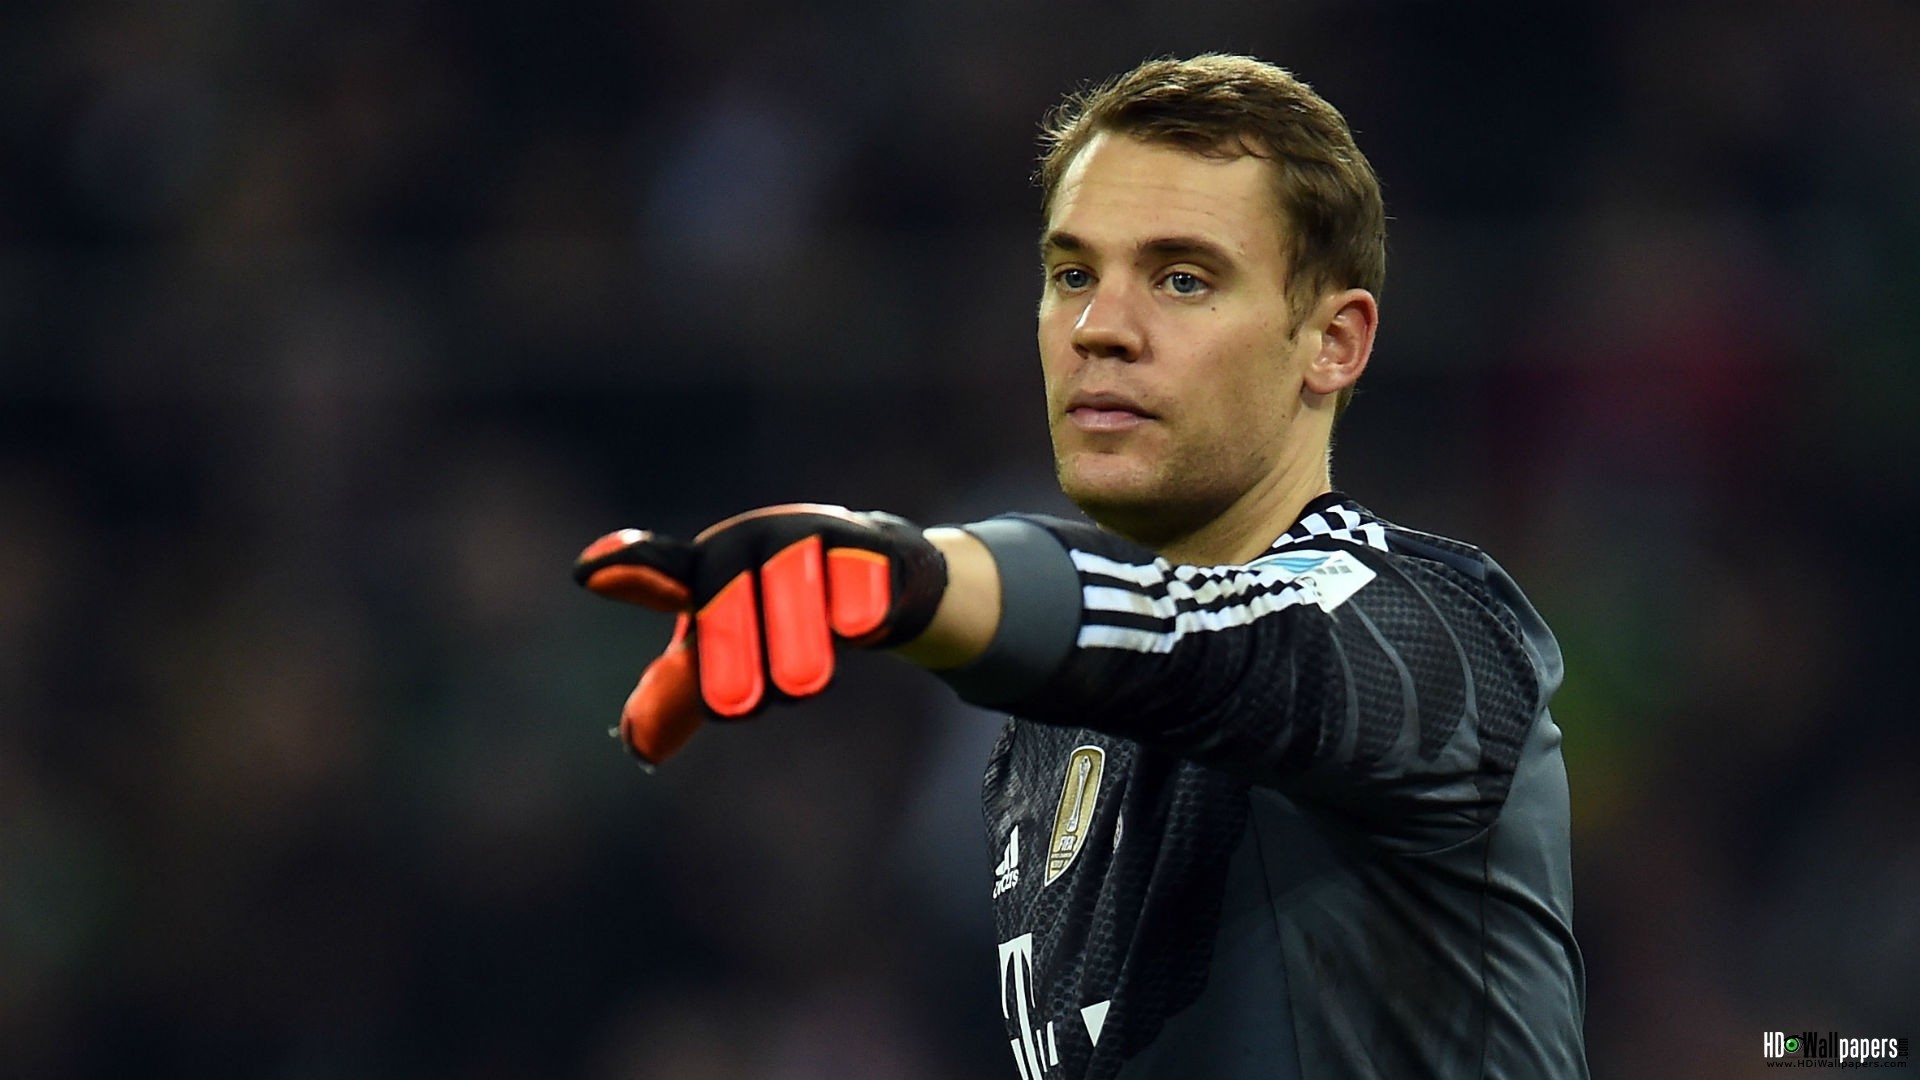 1920x1080 Manuel Neuer Wallpapers Images Photos Pictures Backgrounds Manuel Neuer  Wallpapers High Resolution and Quality Download ...